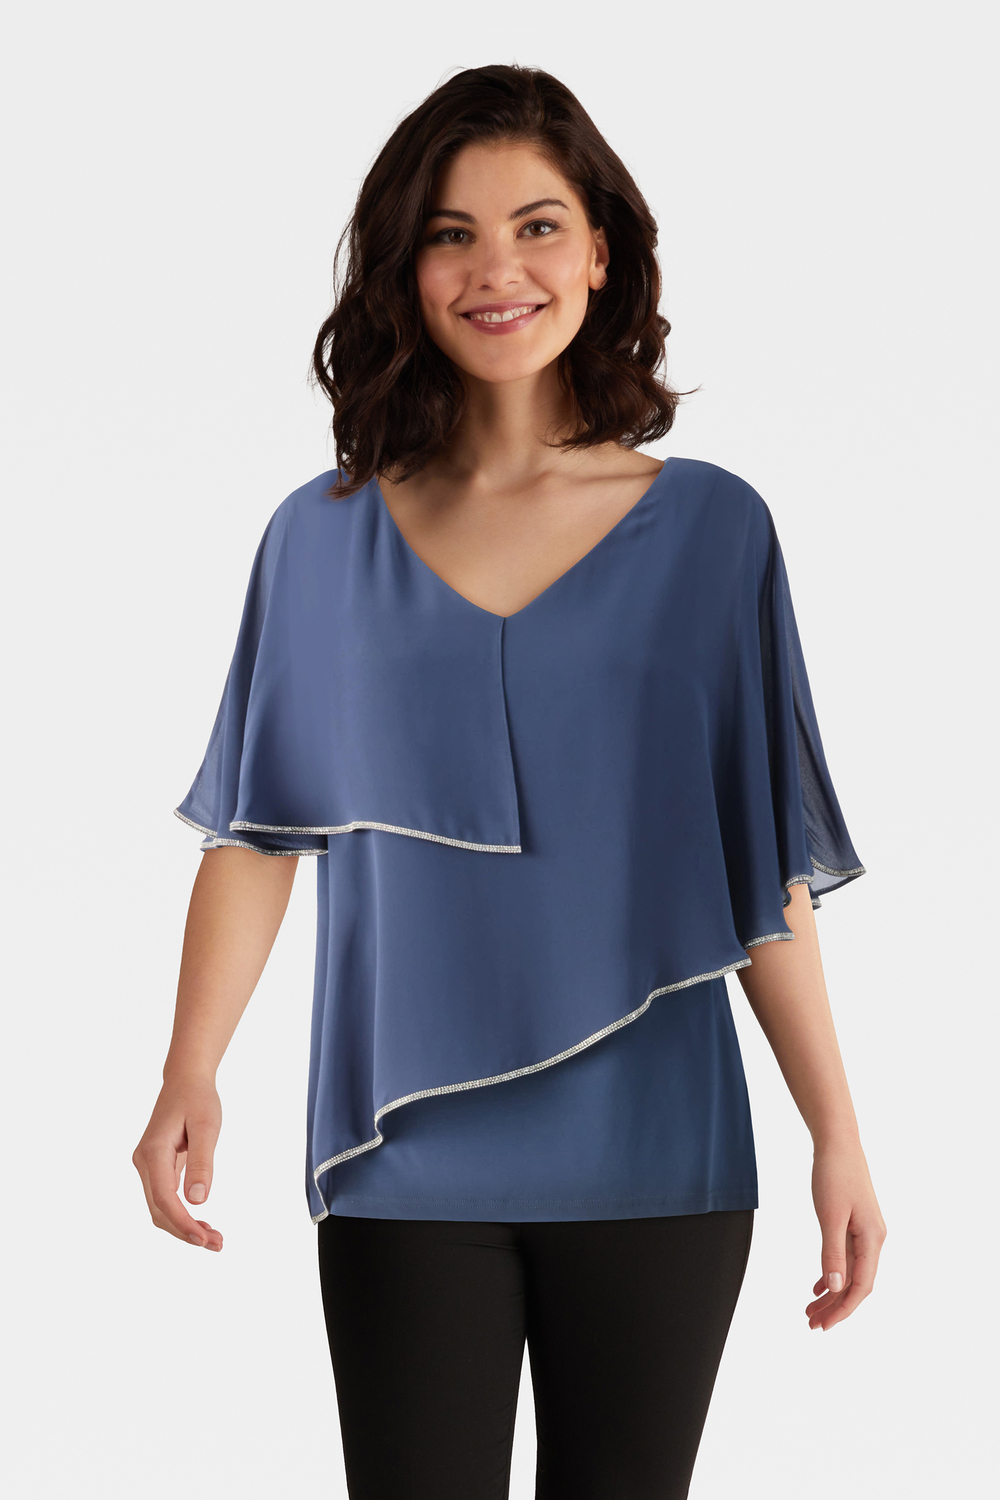 Chiffon Overlay Top Style 231720 (mineral blue)